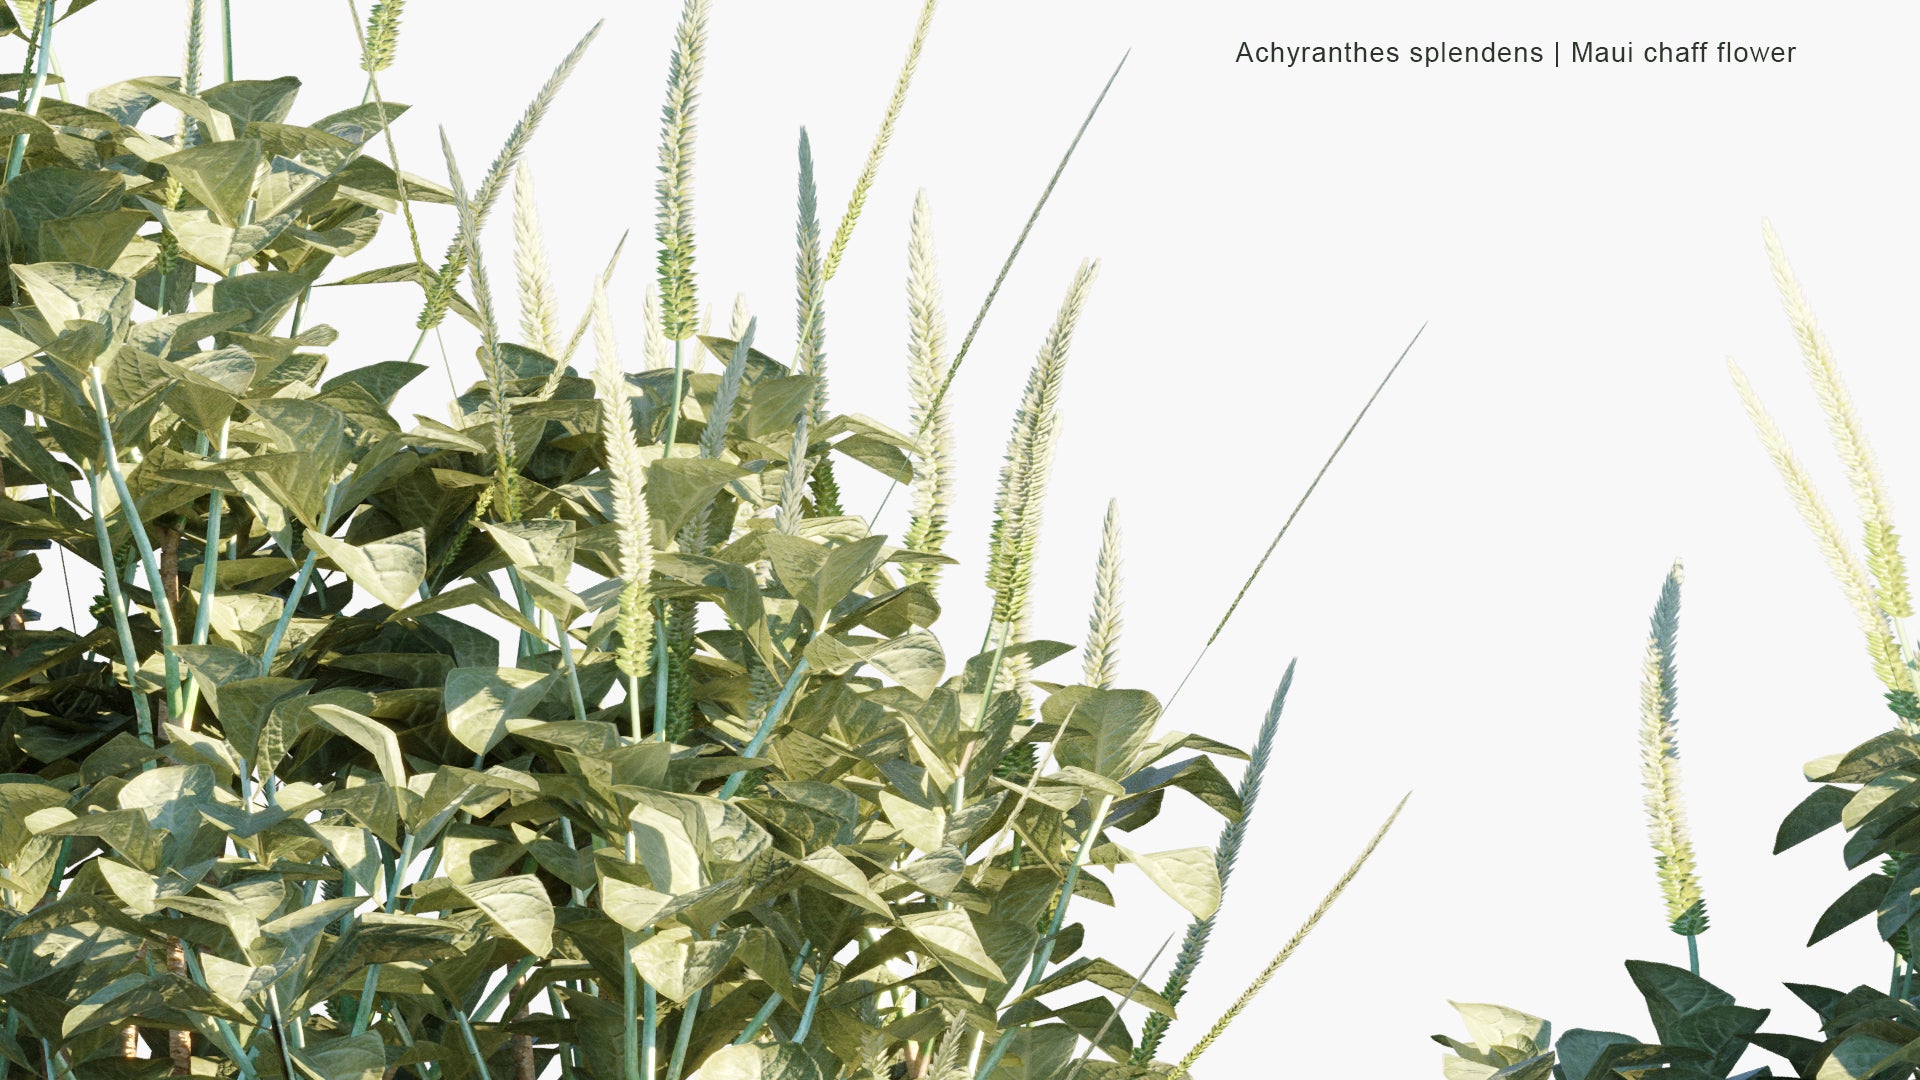 Low Poly Achyranthes Splendens - Maui Chaff Flower, Round Chaff Flower, Round-Leaf Chaff Flower (3D Model)